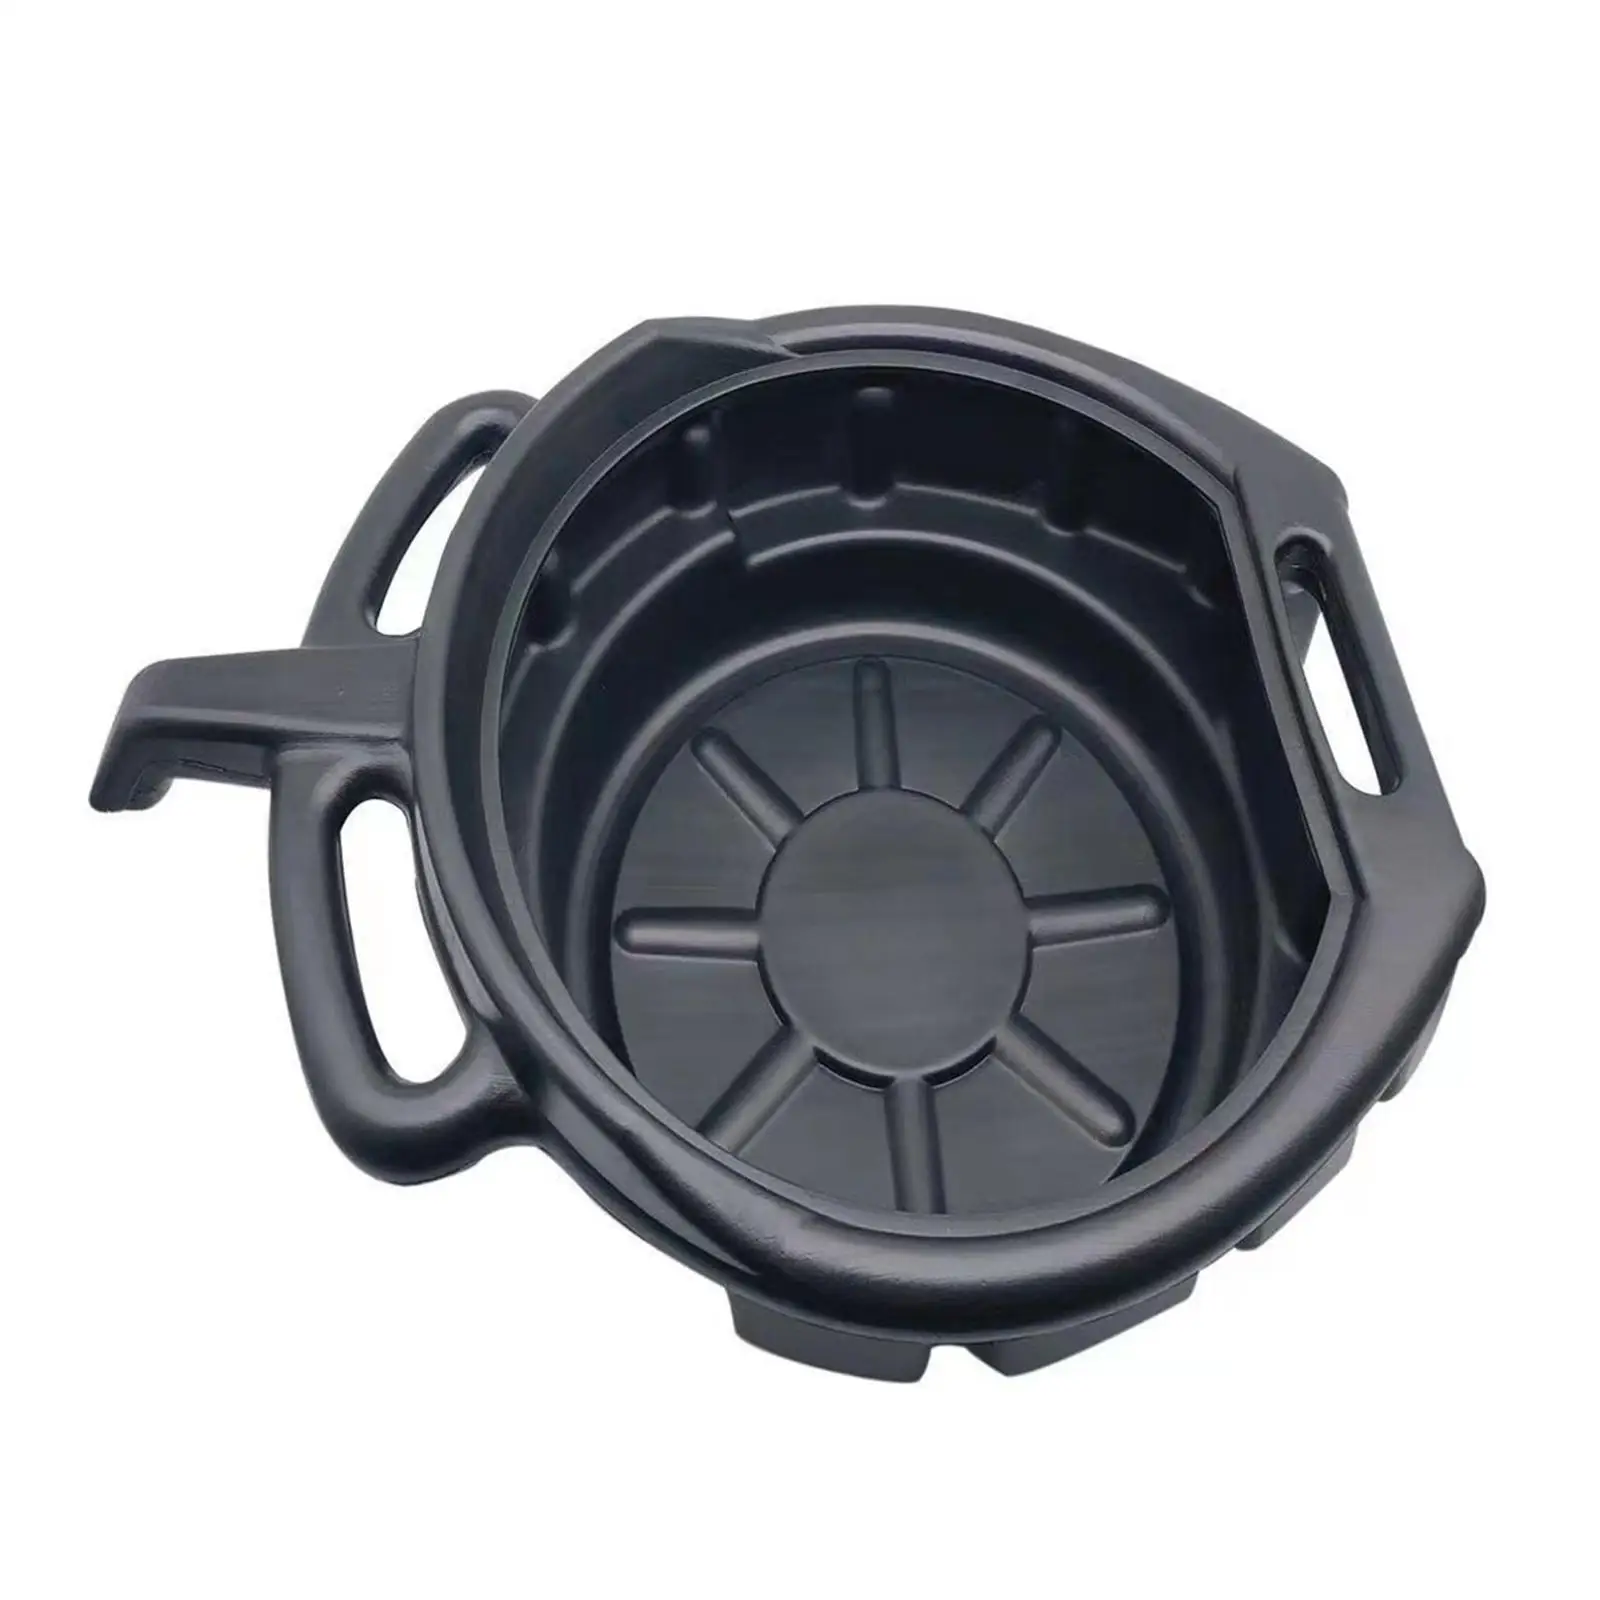 Oil Drain Container Can Tray Waste Engine Oil Collector Leak Large Capacity Drain Pan Accesories for Car Fuel Fluid Garage